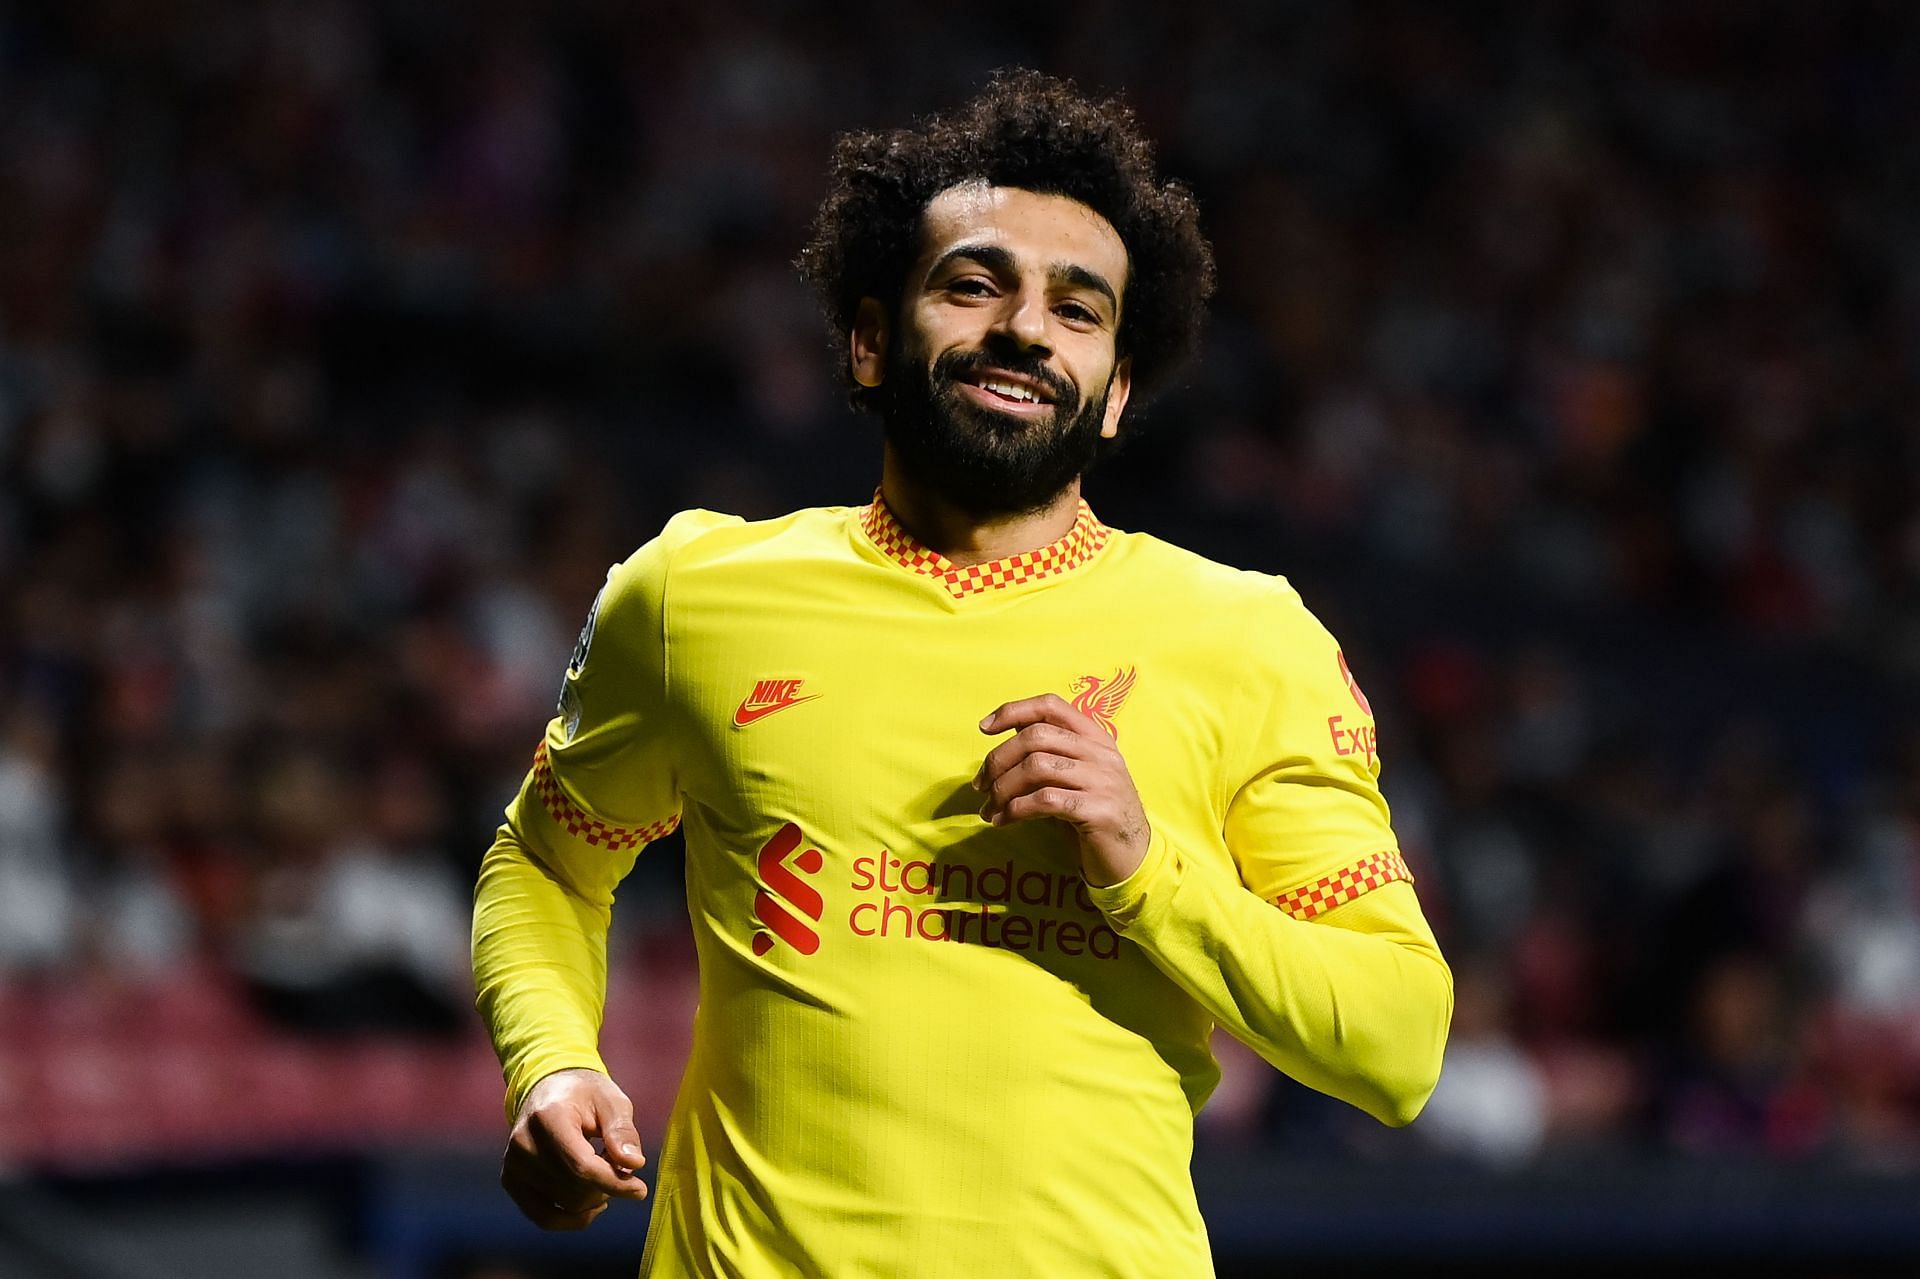 Mo Salah has failed to score only in one game in the Premier League this season